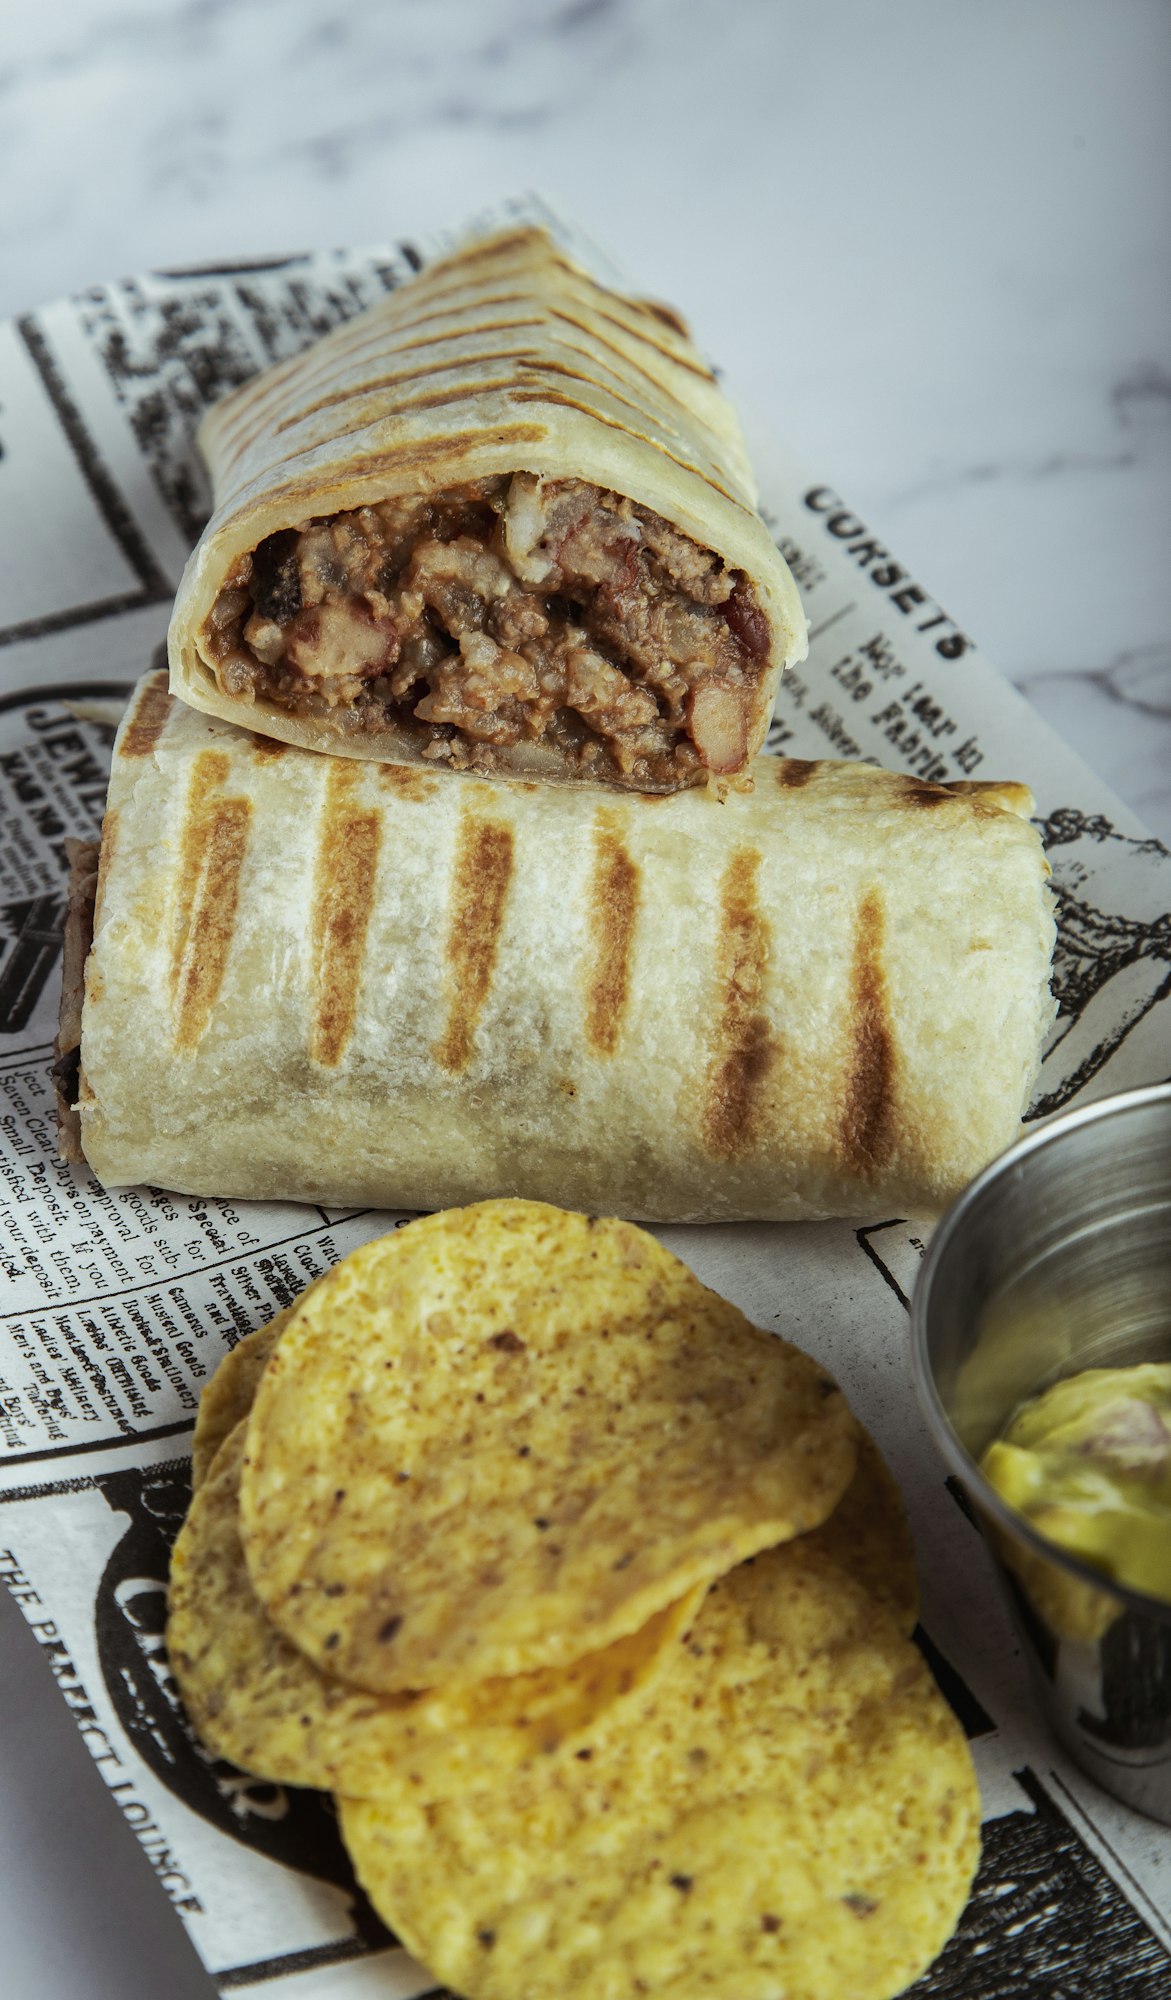 Mexican fast food restaurant - burritos wrapped with pork and vegetables.